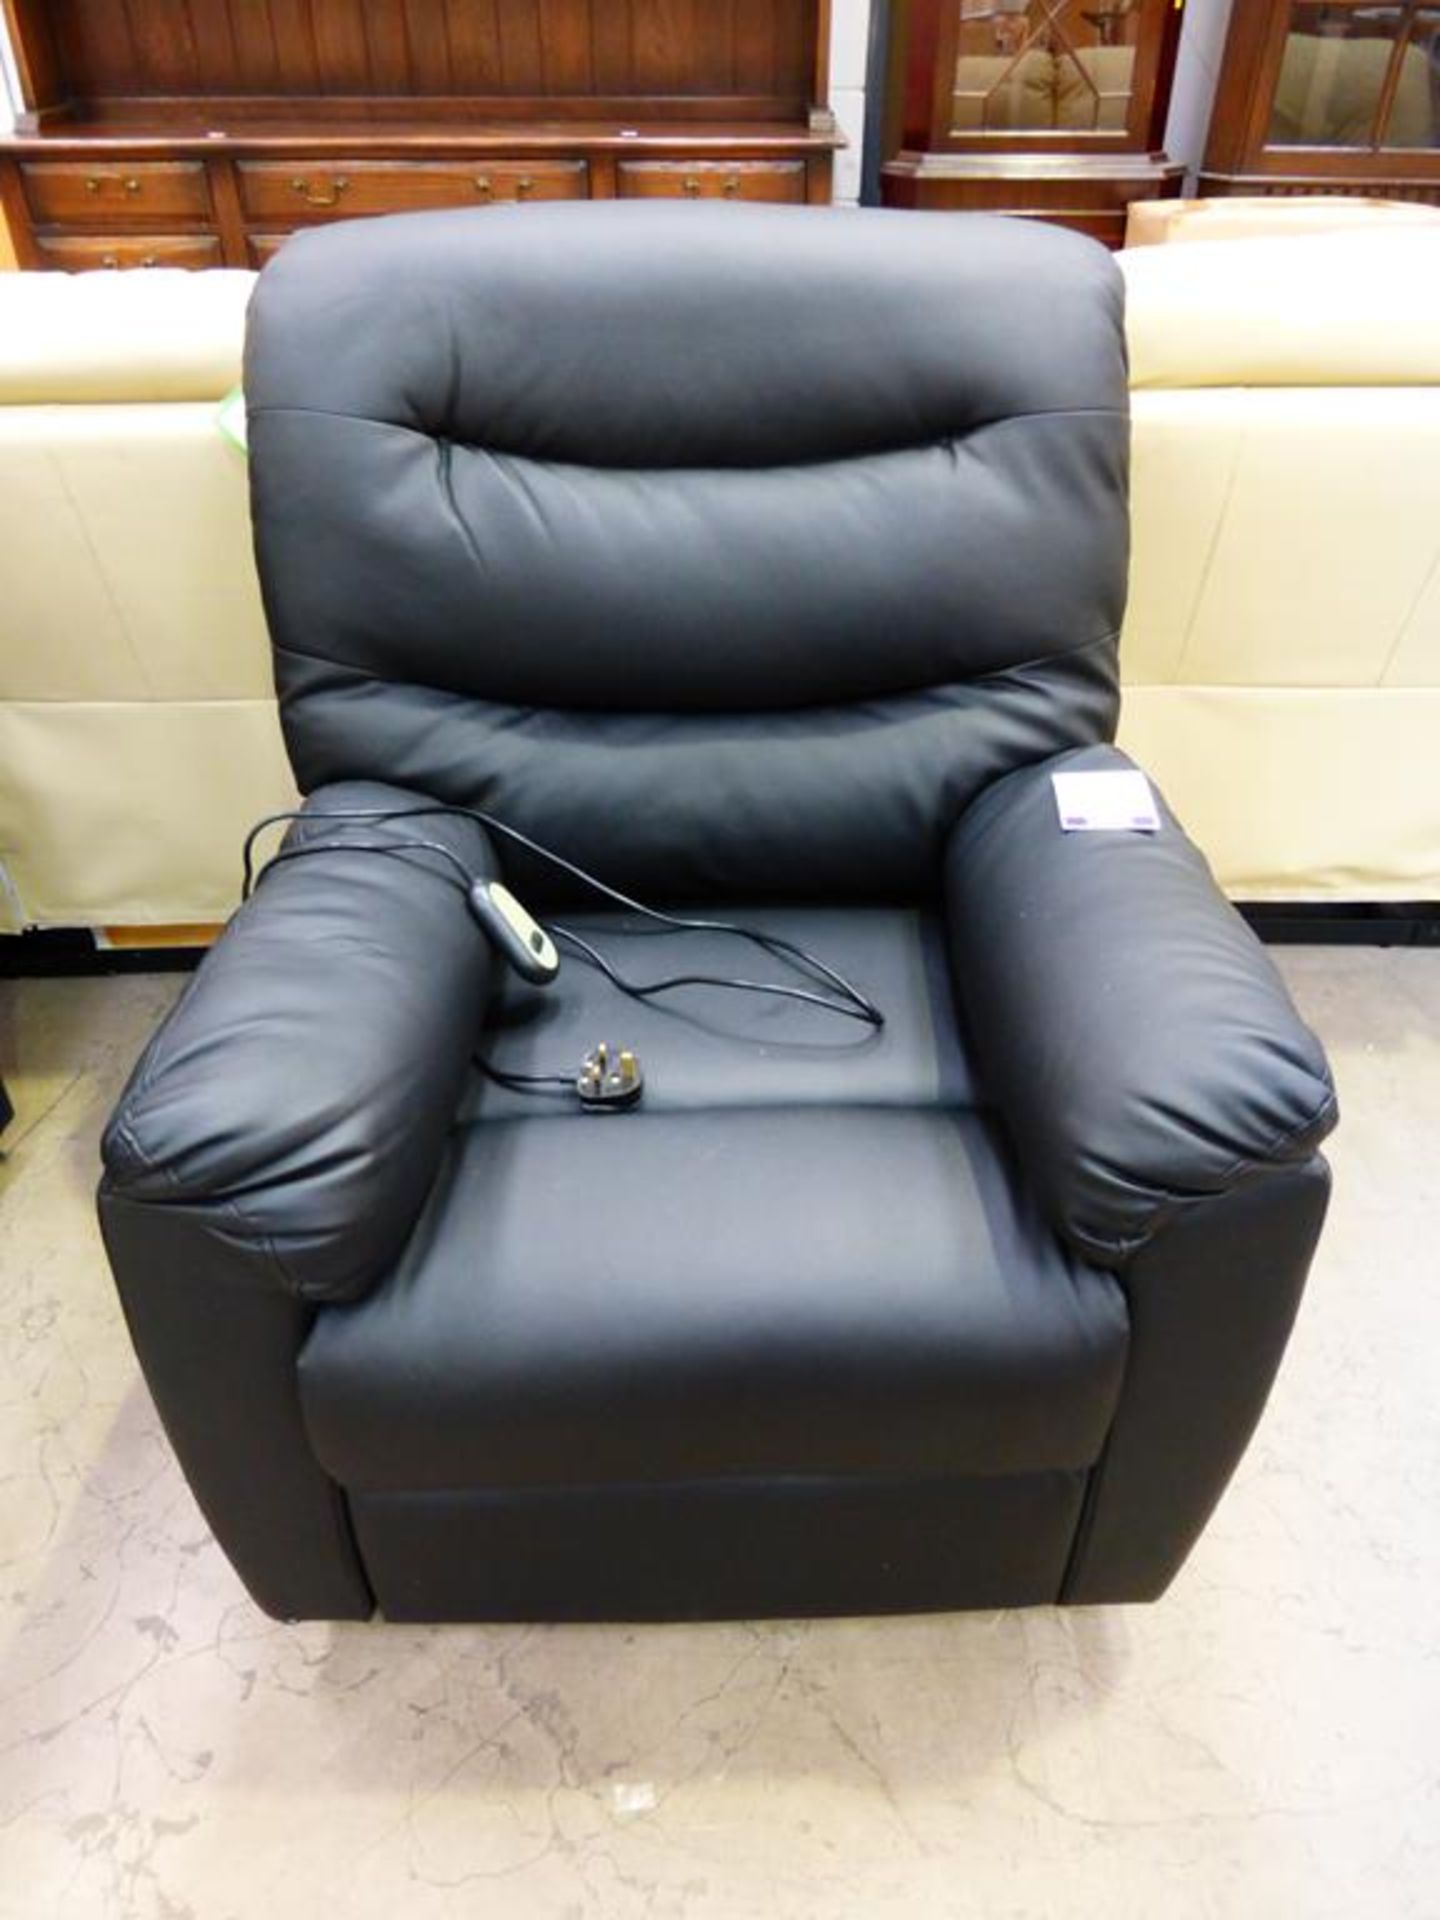 Birlea Regency Rise and Fall Recline Faux Leather Chair with a motorised tilt feature for easy - Image 2 of 7